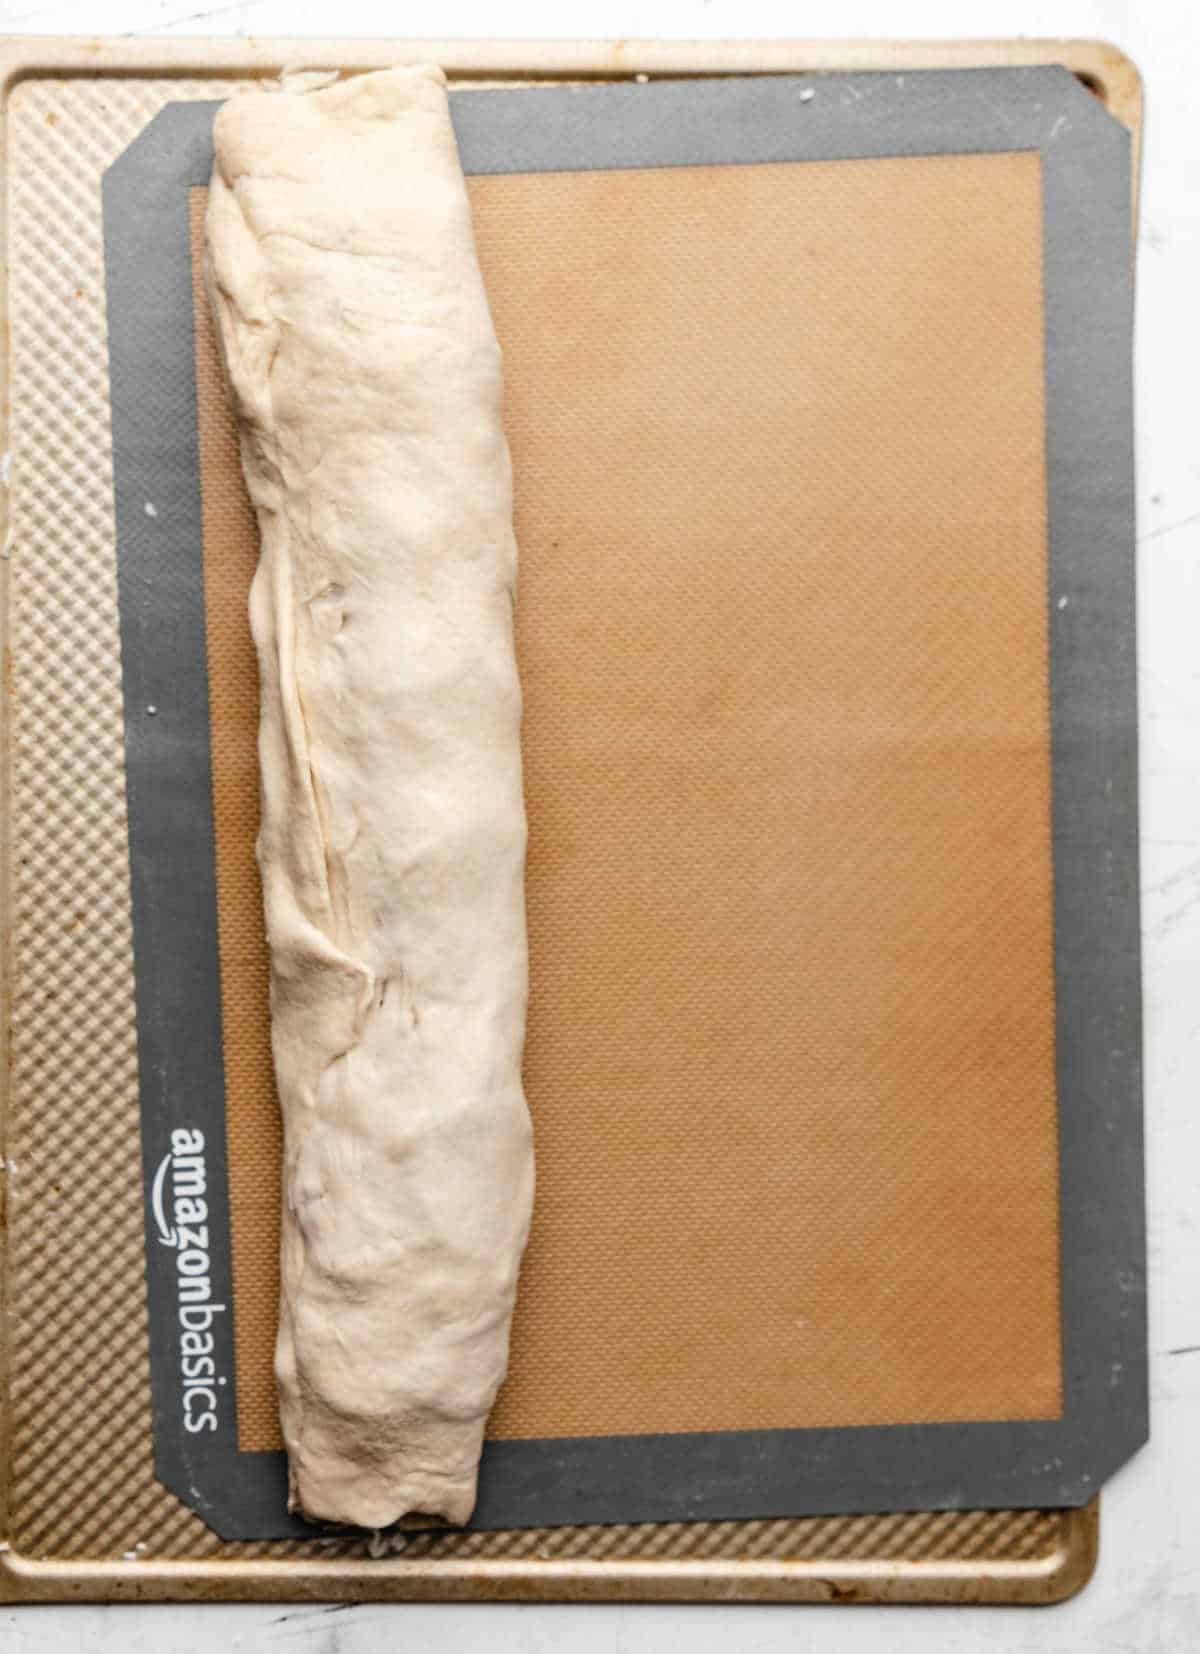 Rolled up pepperoni bread on a silicone baking mat. 